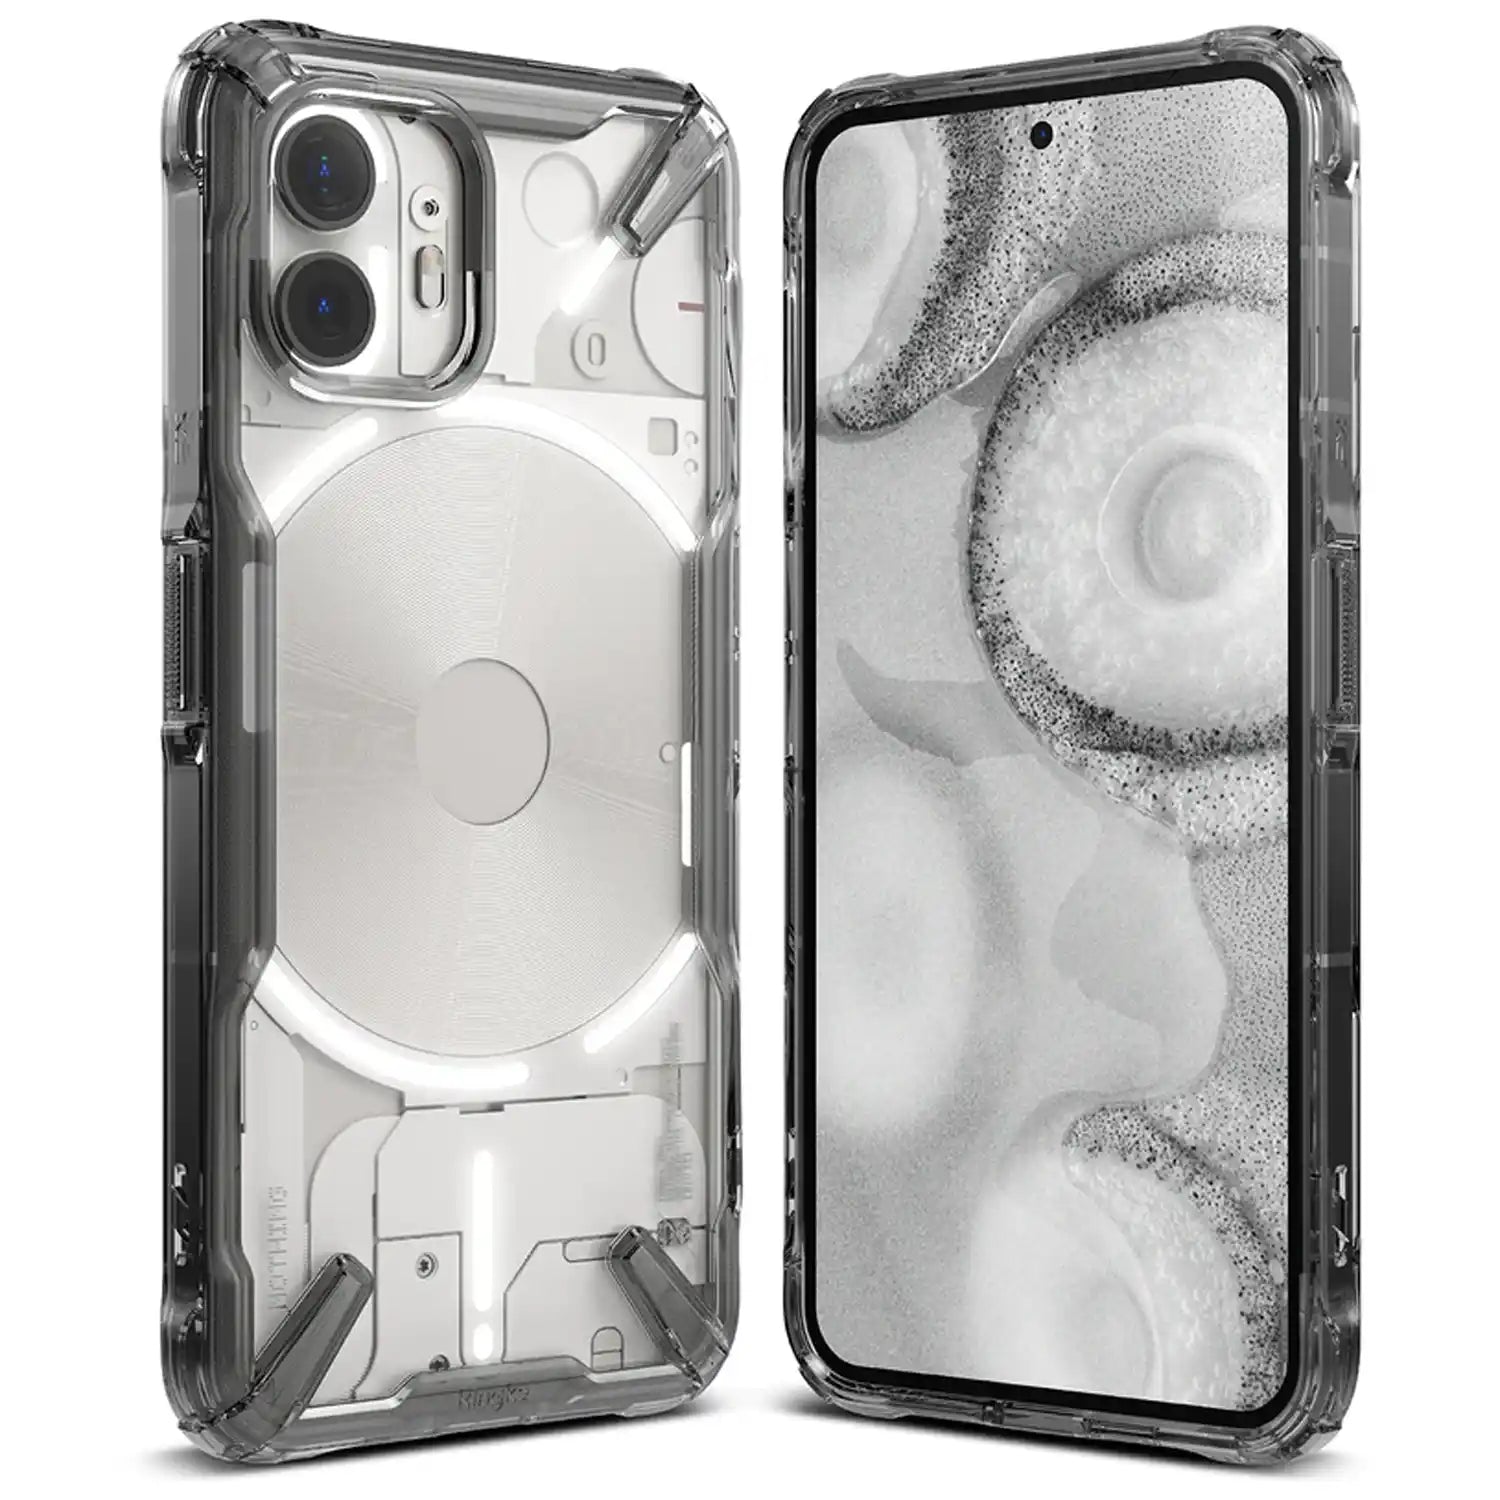 Ringke Fusion-X Case for Nothing Phone 2, Transparent Hard Back Soft Flexible TPU Bumper Scratch Resistant Shockproof Protection Back Cover